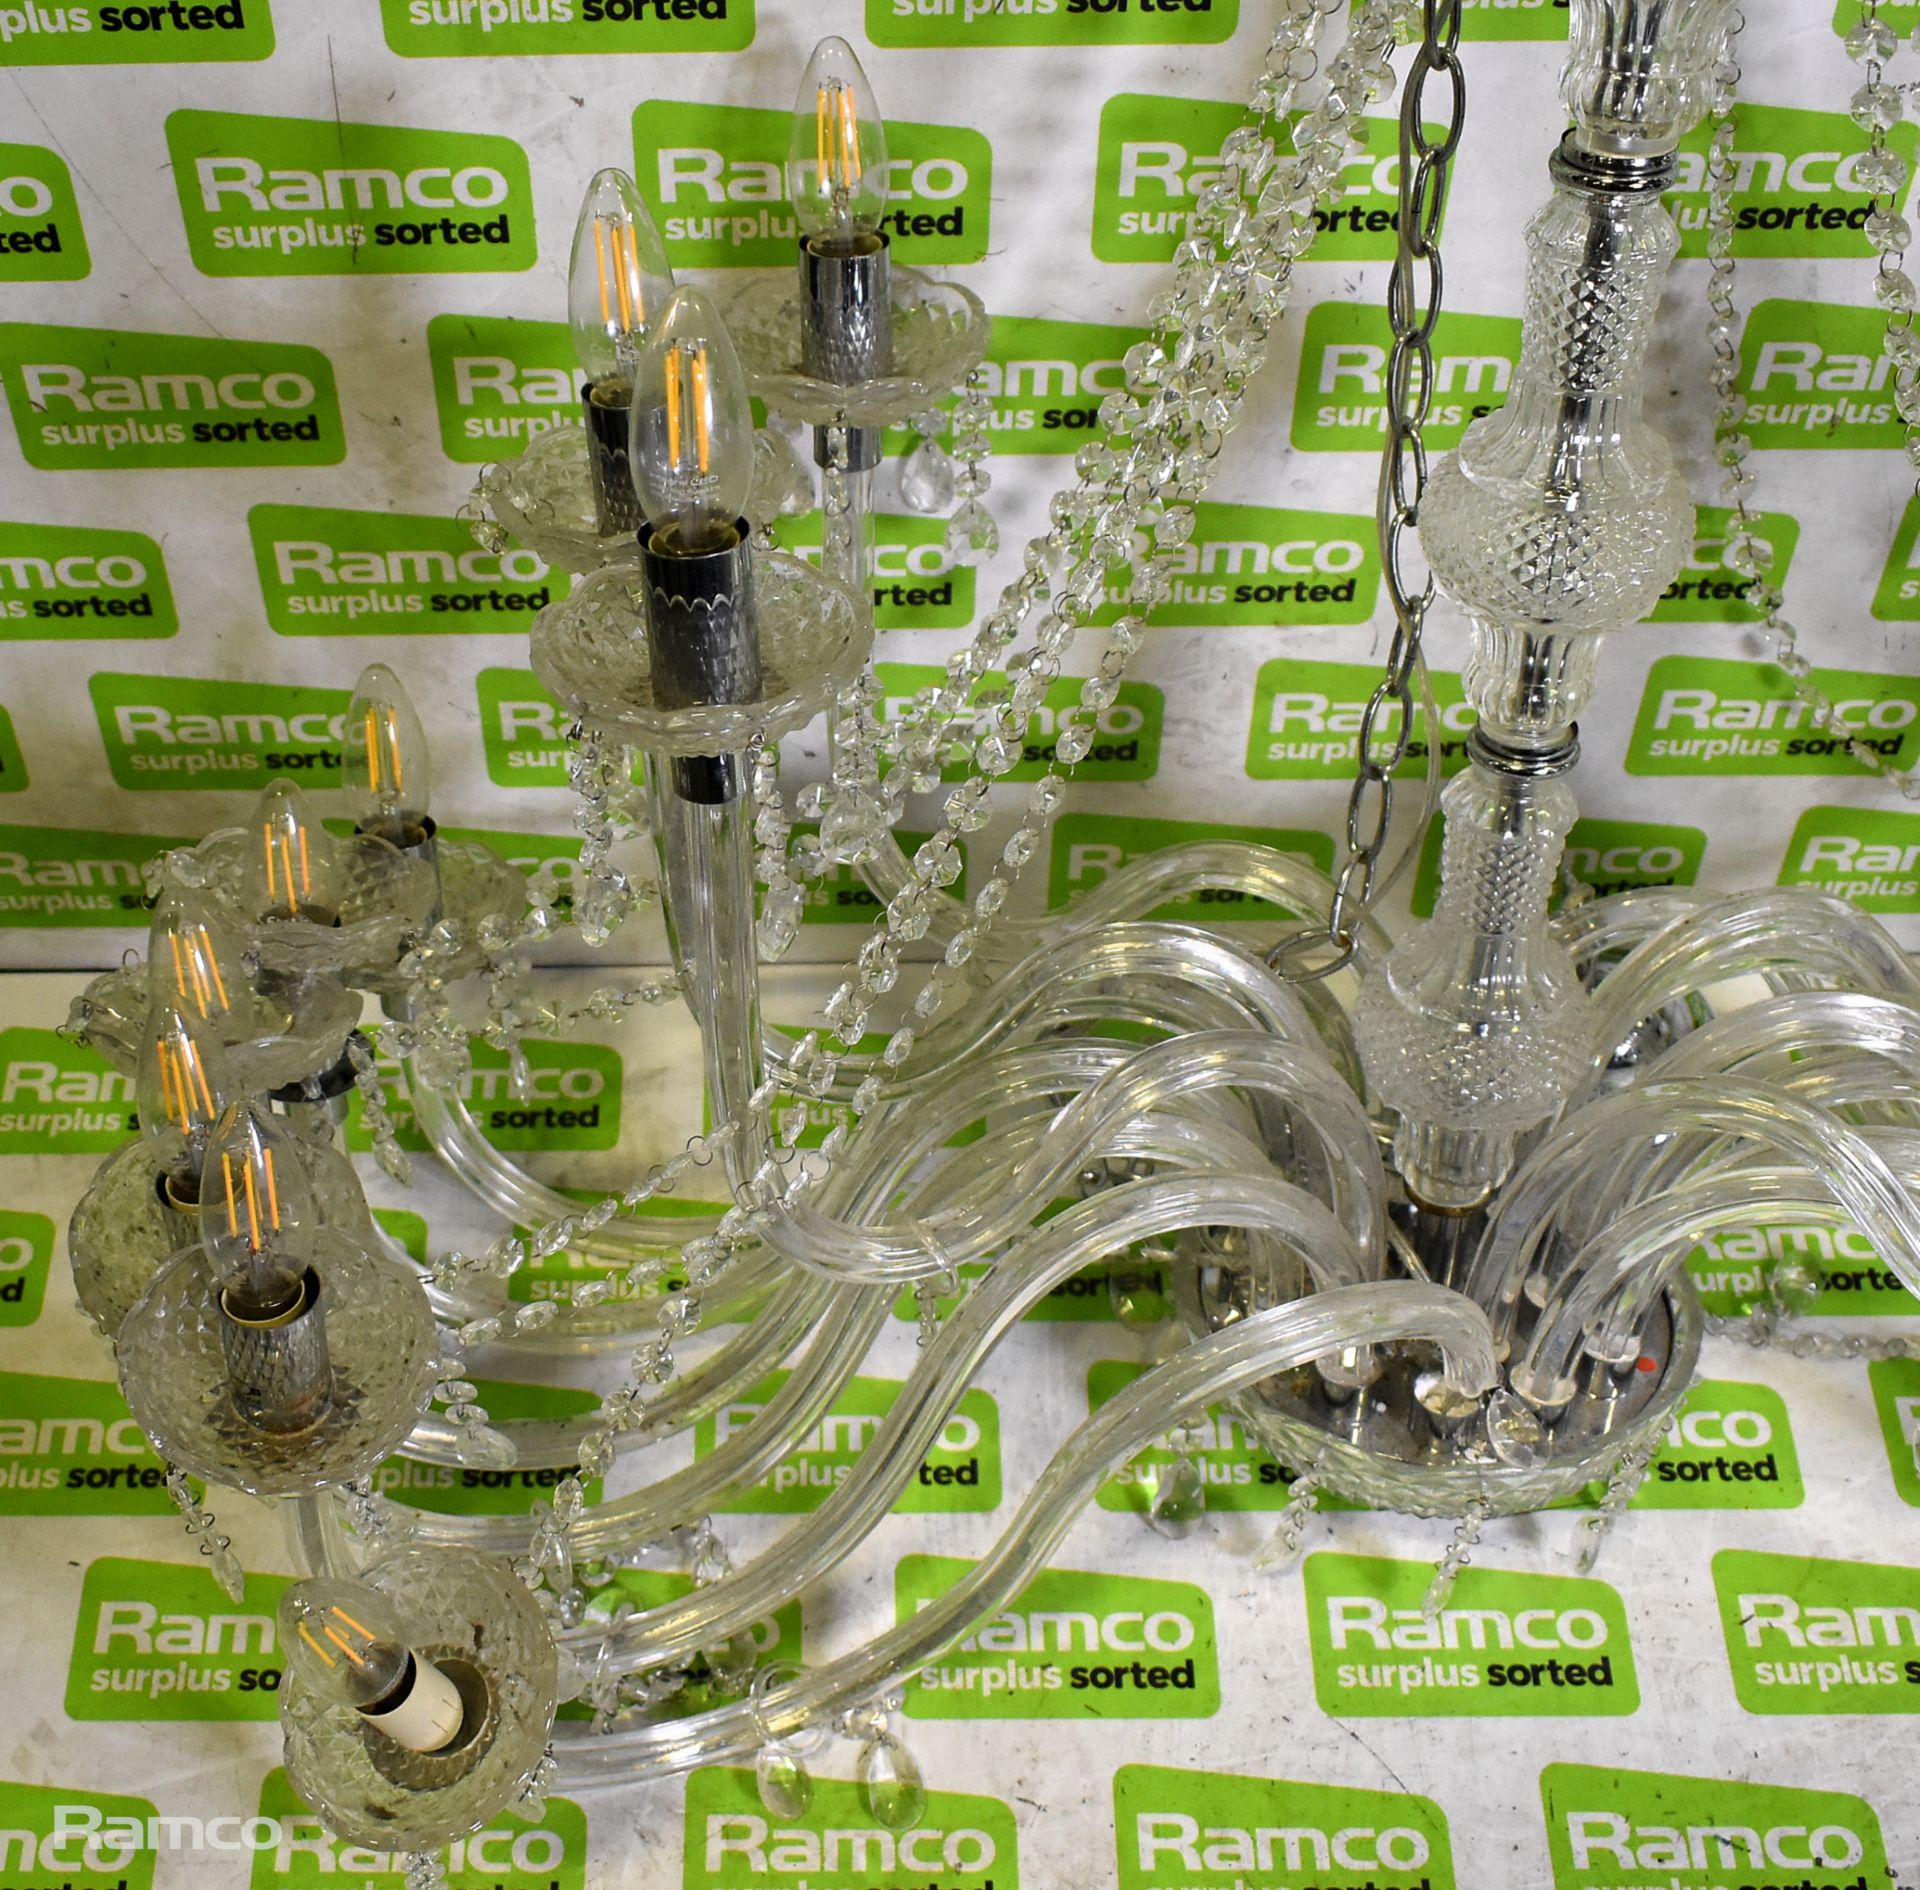 Katie 18lt Chandelier - polished chrome finish clear acrylic droppers and beads - 18 x 40W - Image 2 of 7